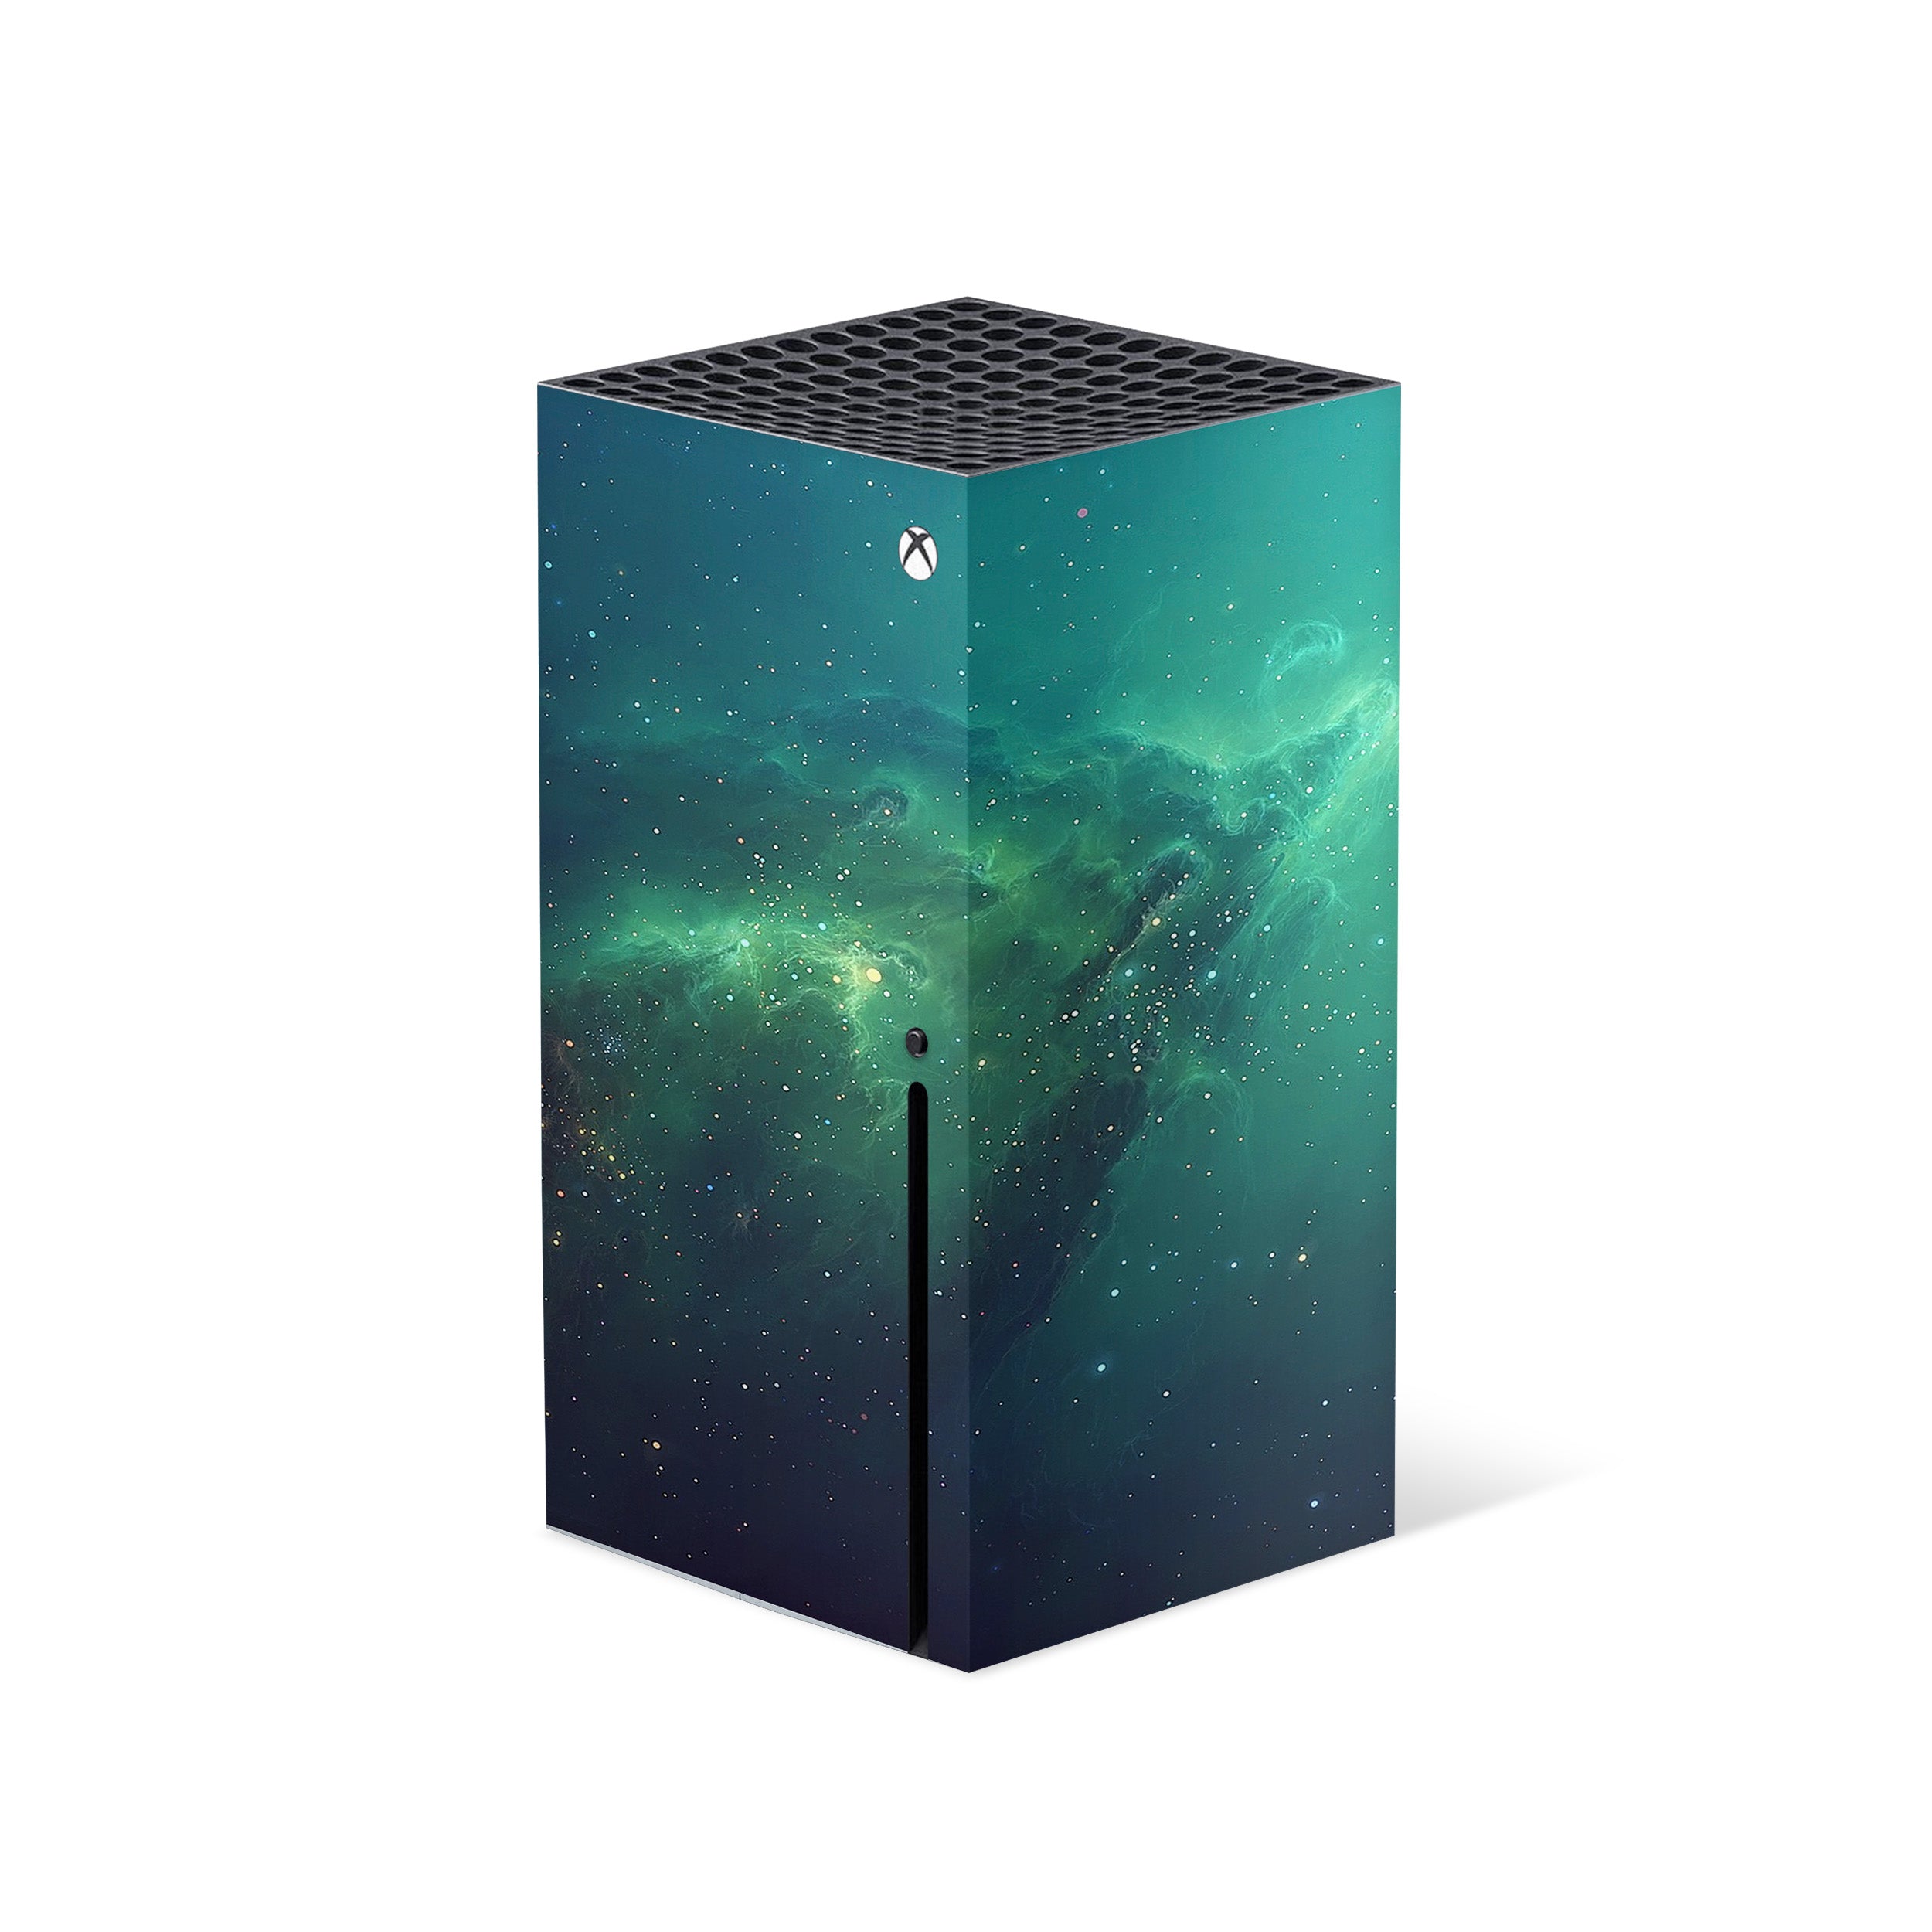 A video game skin featuring a Space design for the Xbox Series X.